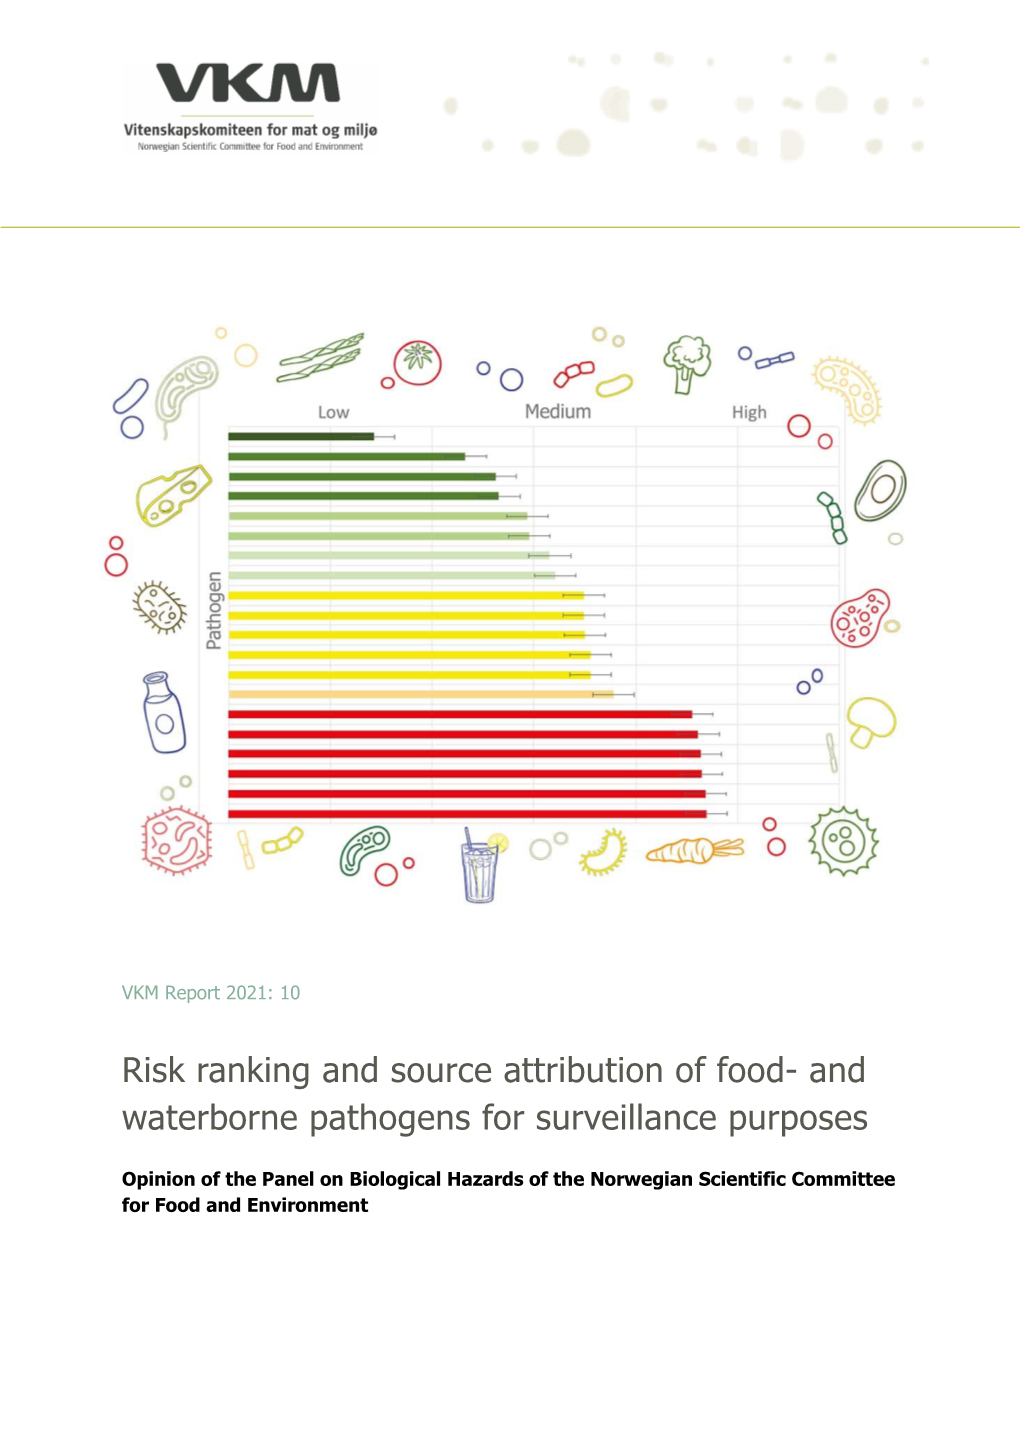 Risk Ranking and Source Attribution of Food- and Waterborne Pathogens for Surveillance Purposes